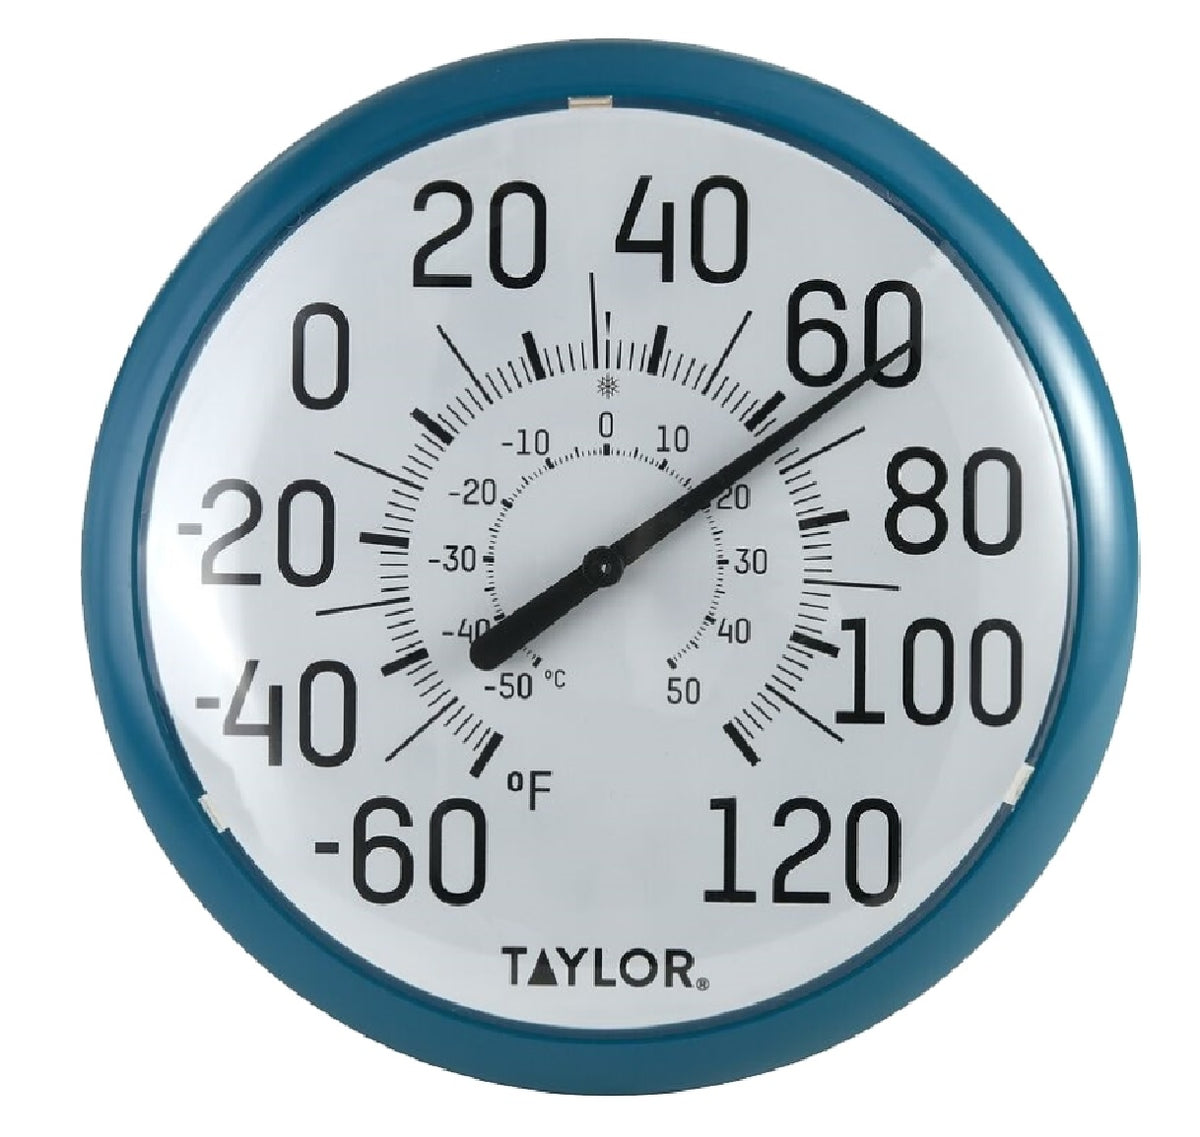 Taylor 6700TE Big & Bold Thermometer, Teal Bezel, 13.25 Inch